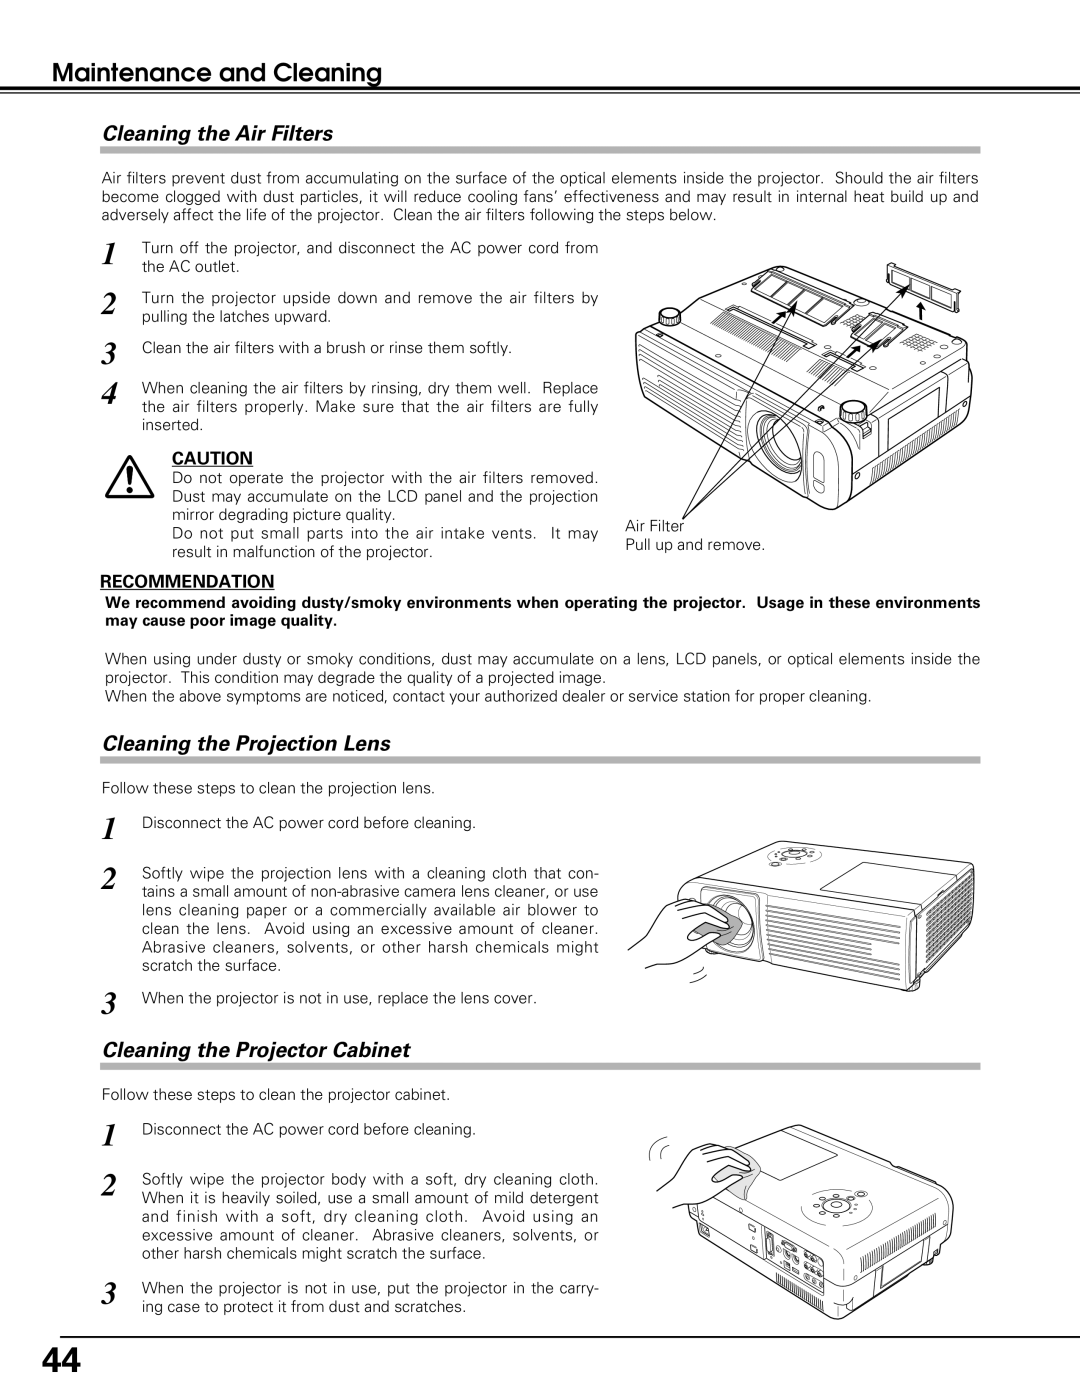 Black Box LC-XE10 instruction manual Maintenance and Cleaning, Cleaning the Air Filters, Cleaning the Projection Lens 